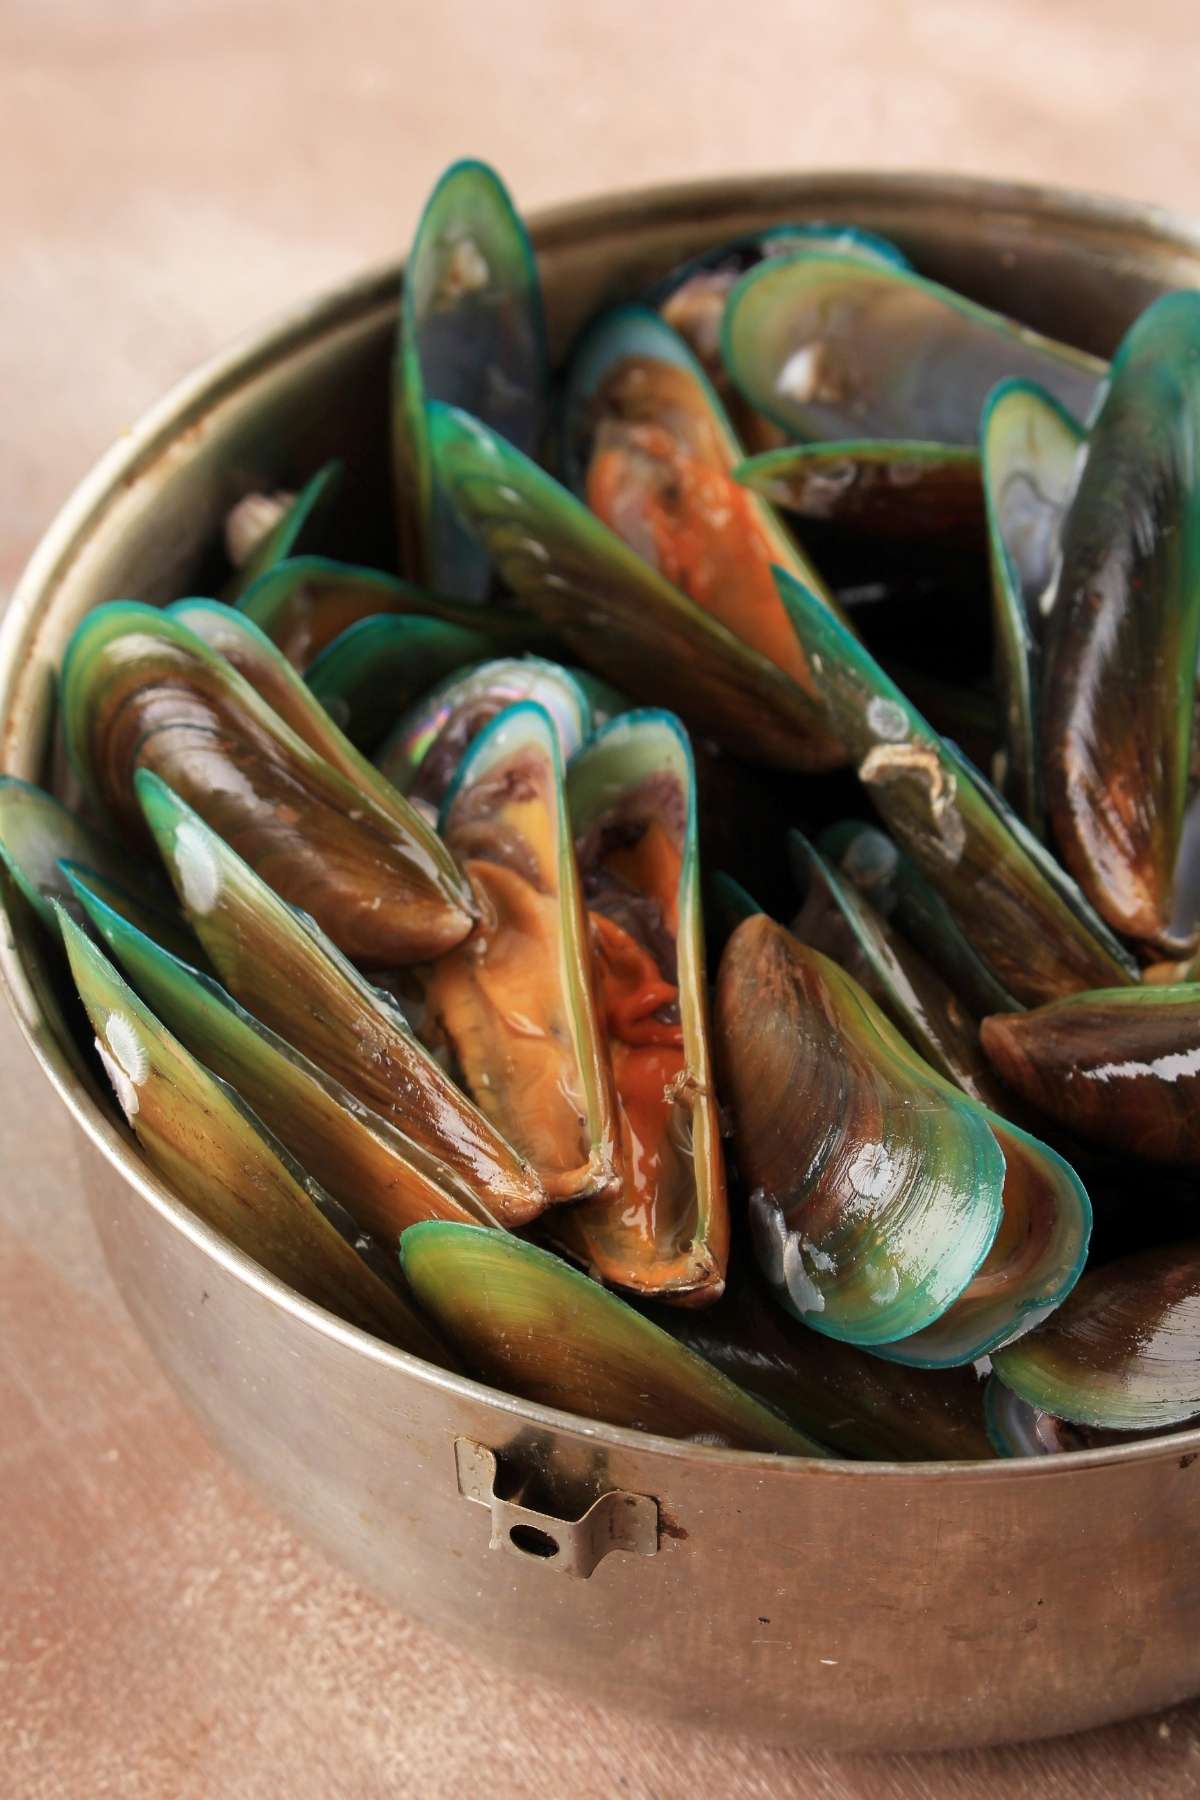 Black mussels are a popular dish for seafood lovers. Known for their health benefits, ease of cooking, and flavor, it’s no wonder these delicious morsels have grown in popularity! Below you will find tips on how to prepare mussels, and the difference between black mussels and green mussels.